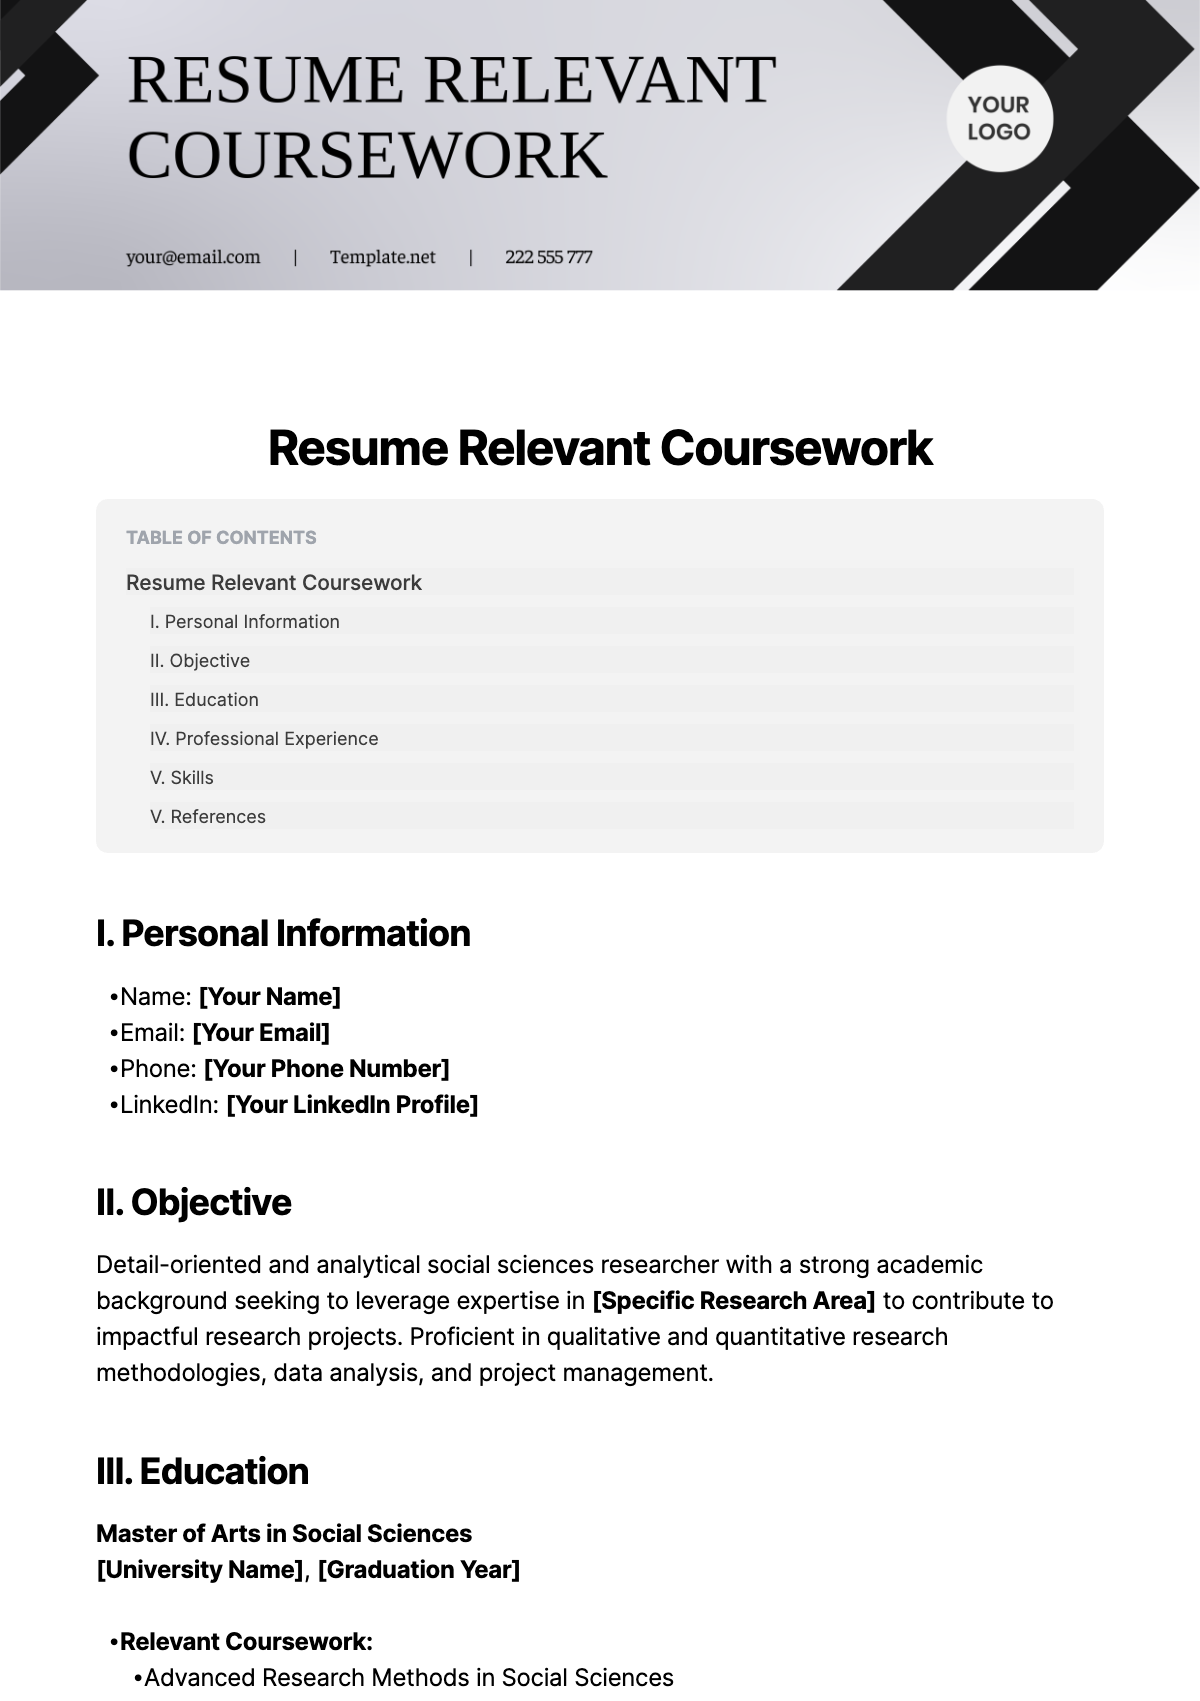 Resume Relevant Coursework Template